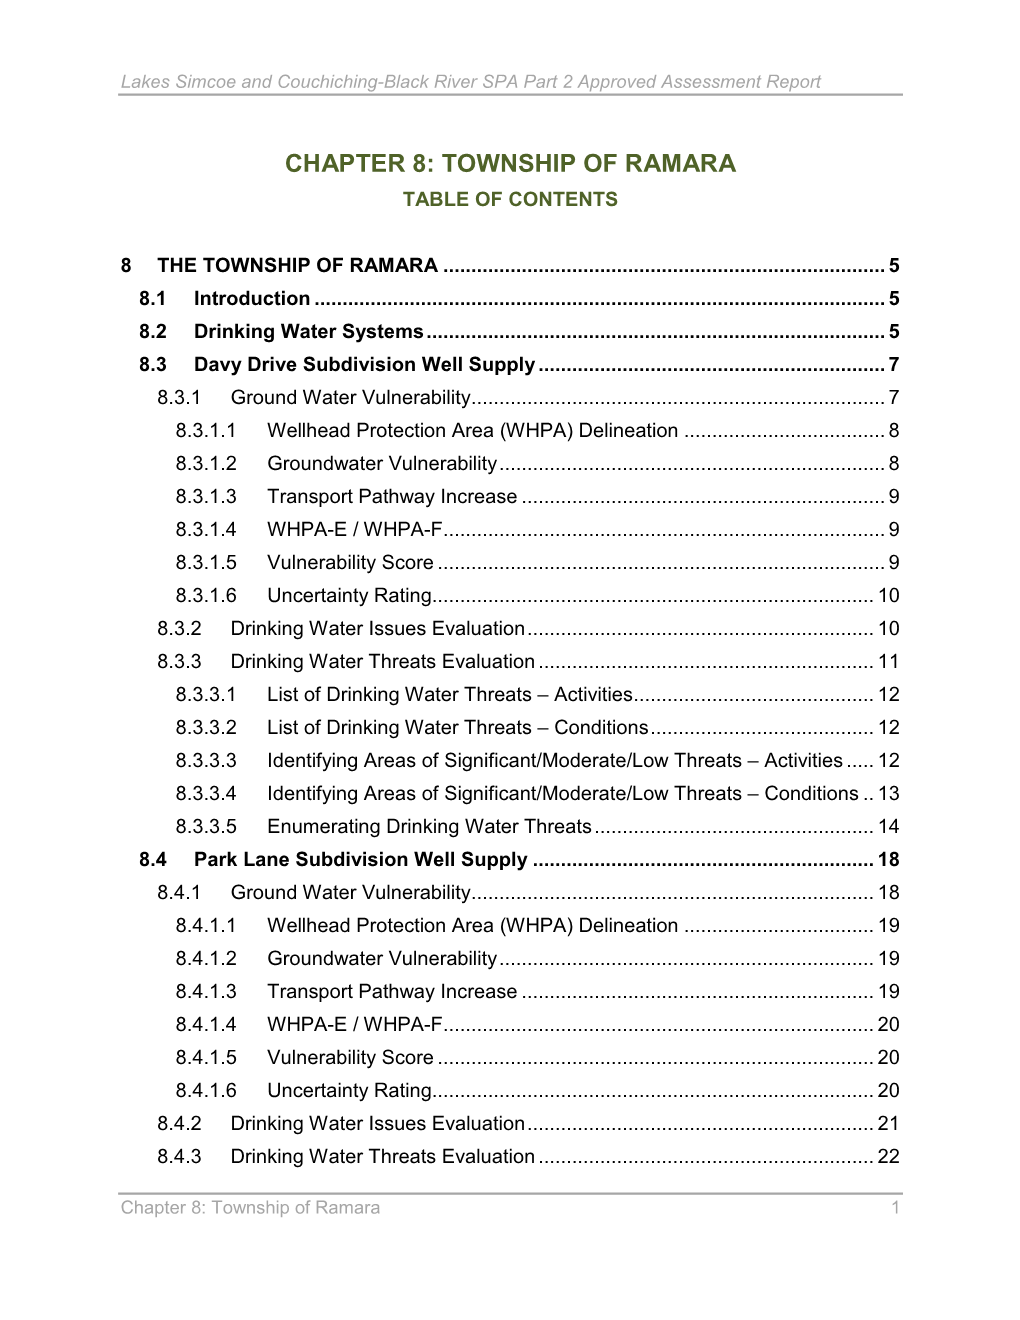 Chapter 8: Township of Ramara Table of Contents